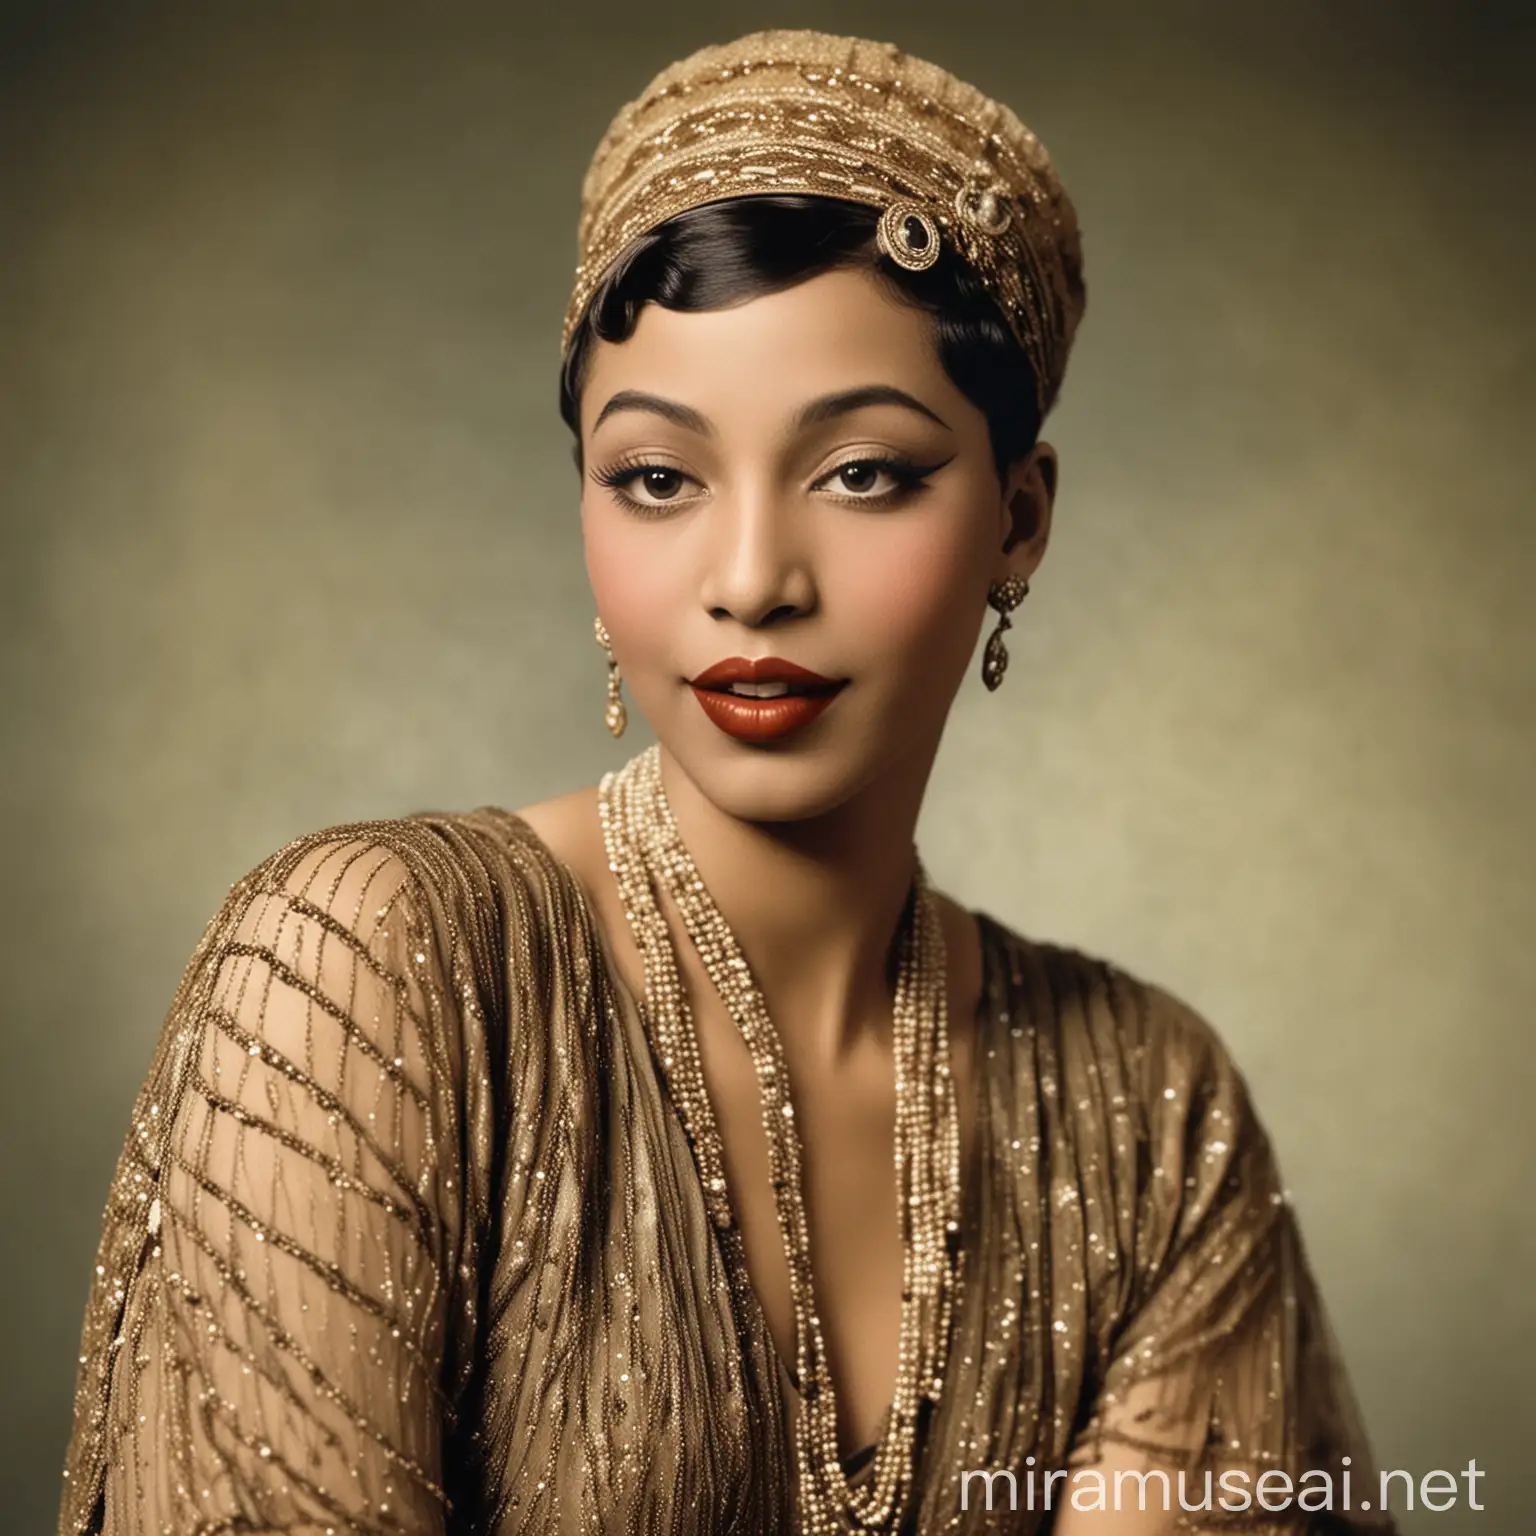 color picture of young Josephine Baker in classy 1920's clothes